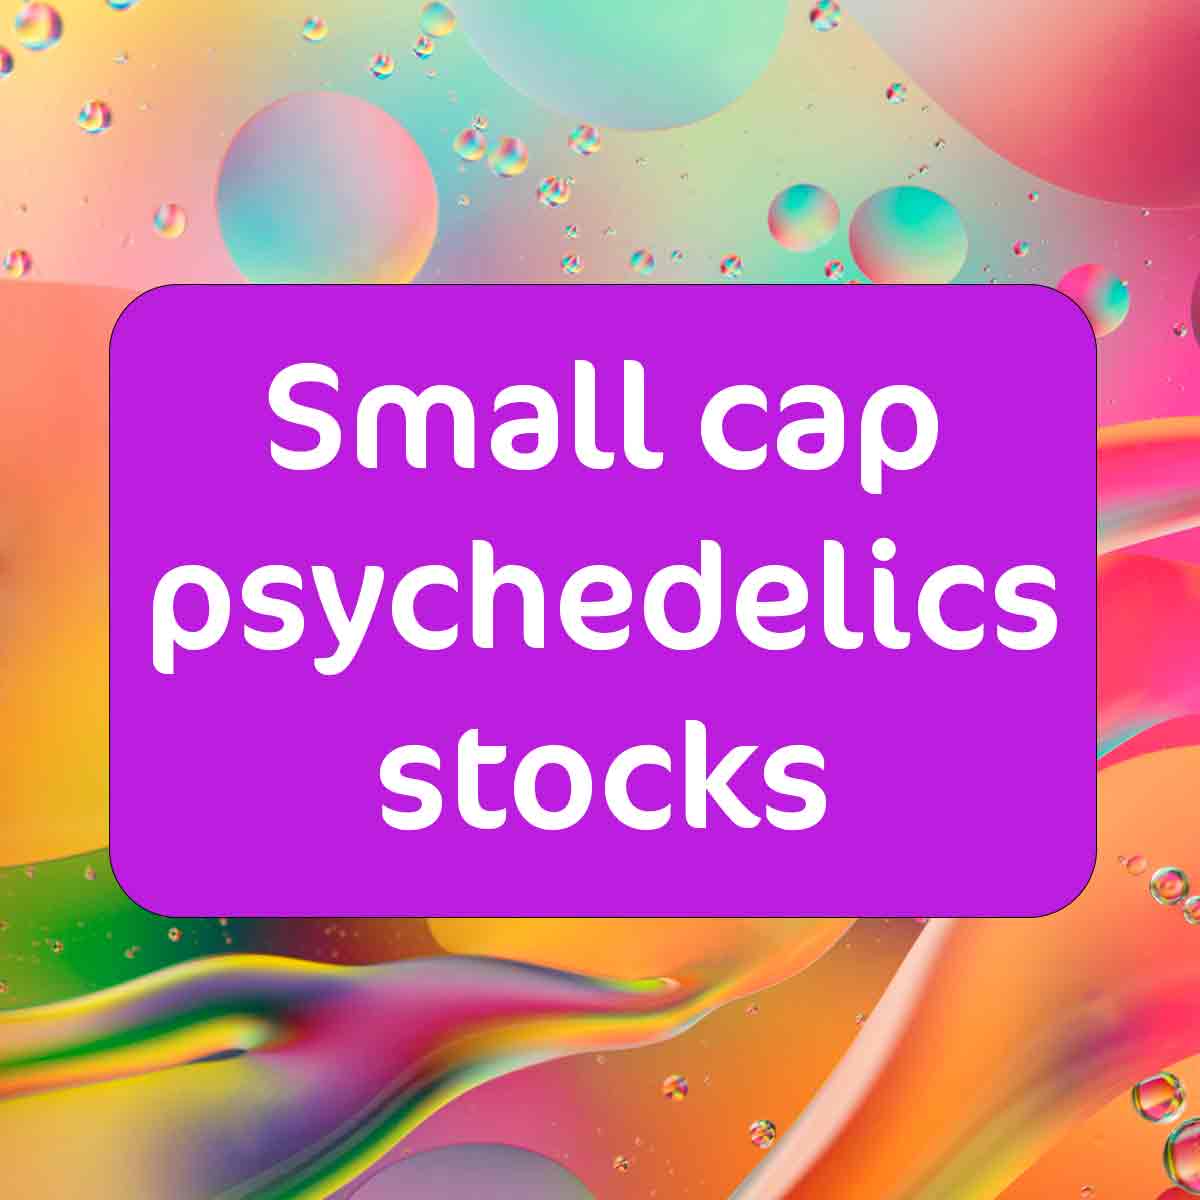 Small cap psychedelics stocks – Today’s Idea